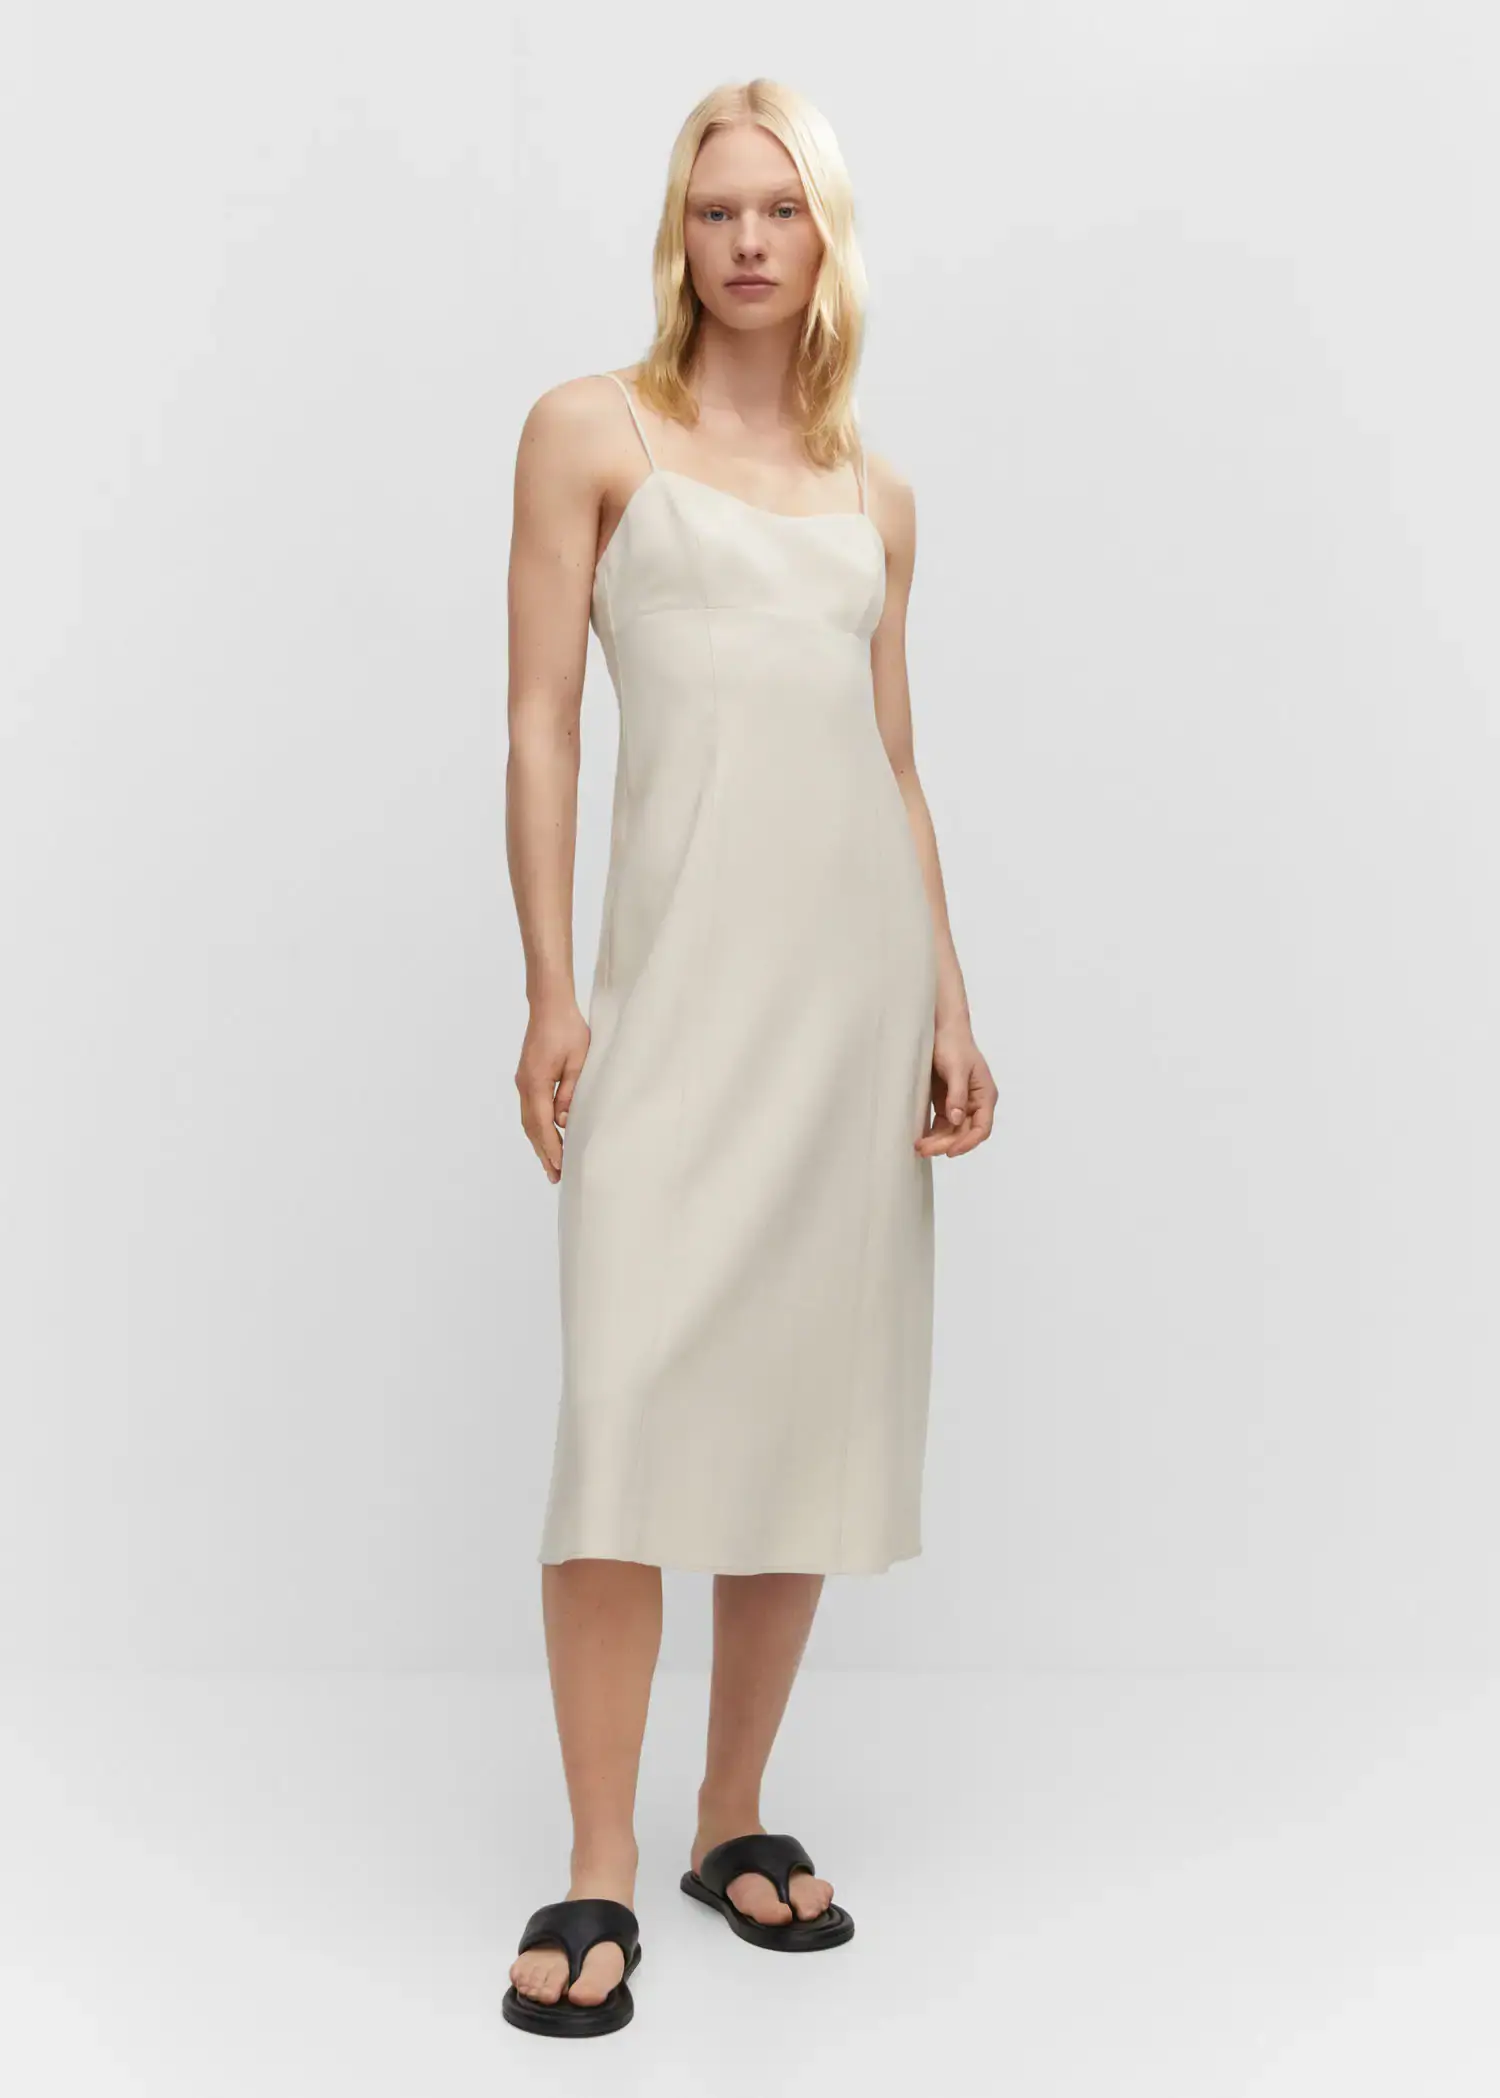 Mango Low-cut midi-dress. a woman in a white dress standing in front of a white wall. 